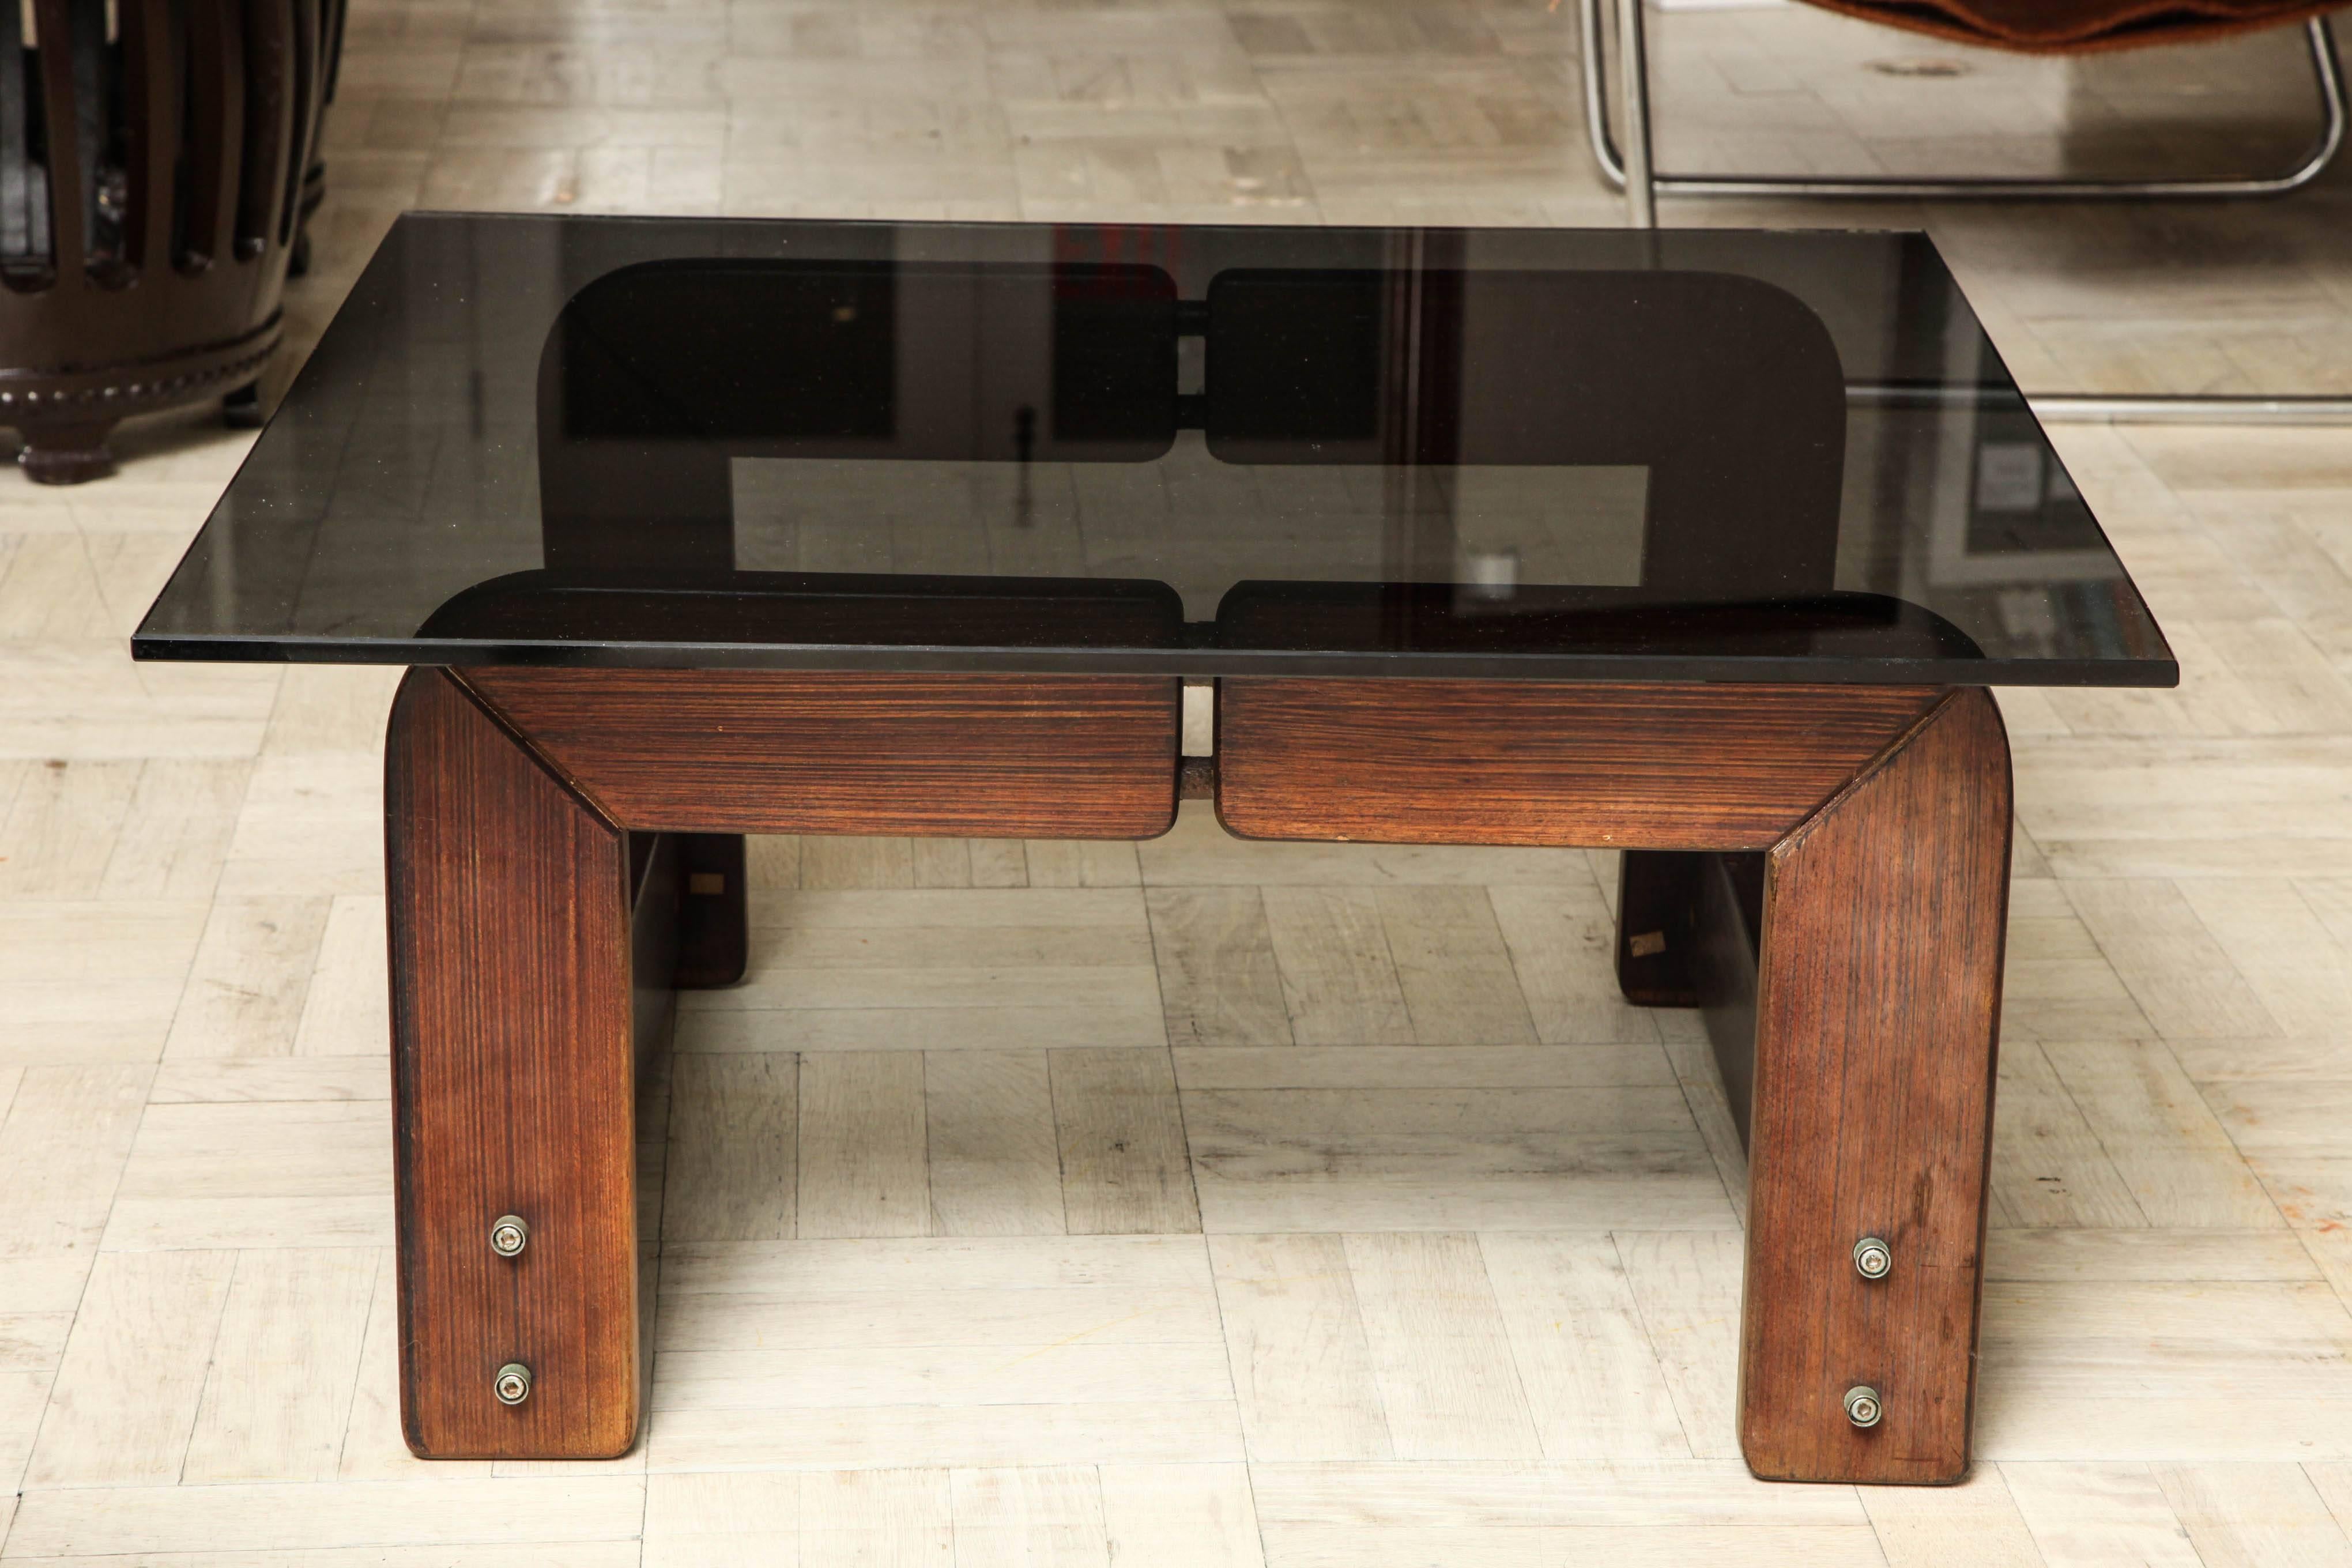 Brazilian Pair of 20th Century Exotic Wood and Smoked Glass Tables